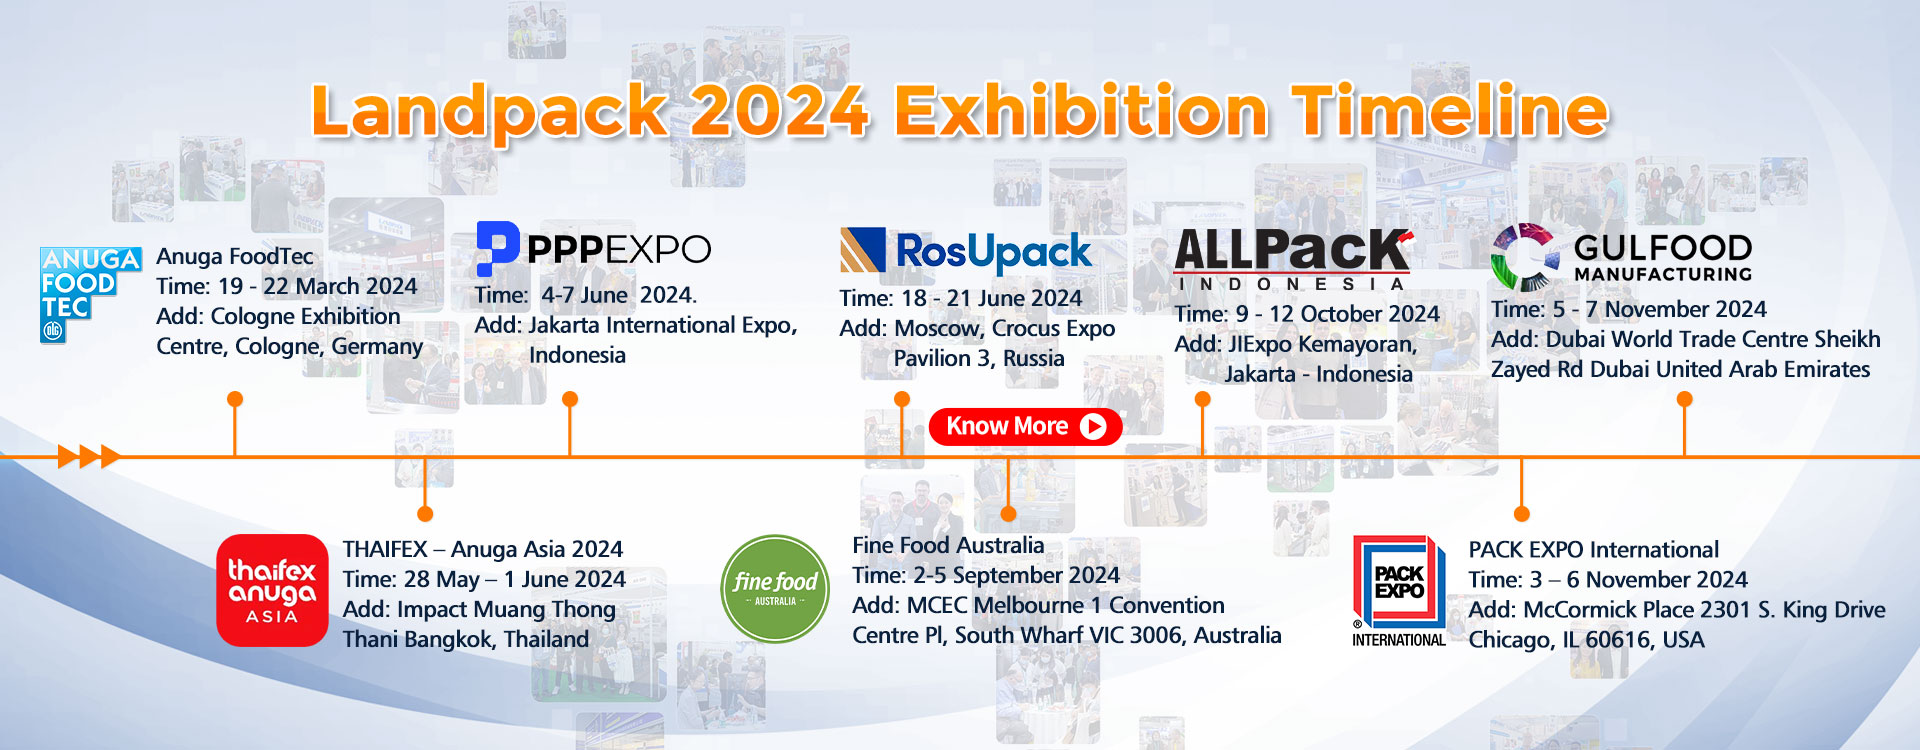 The Following Is Our Exhibition Timeline In 2024, Welcome To Visit Our Exhibition!